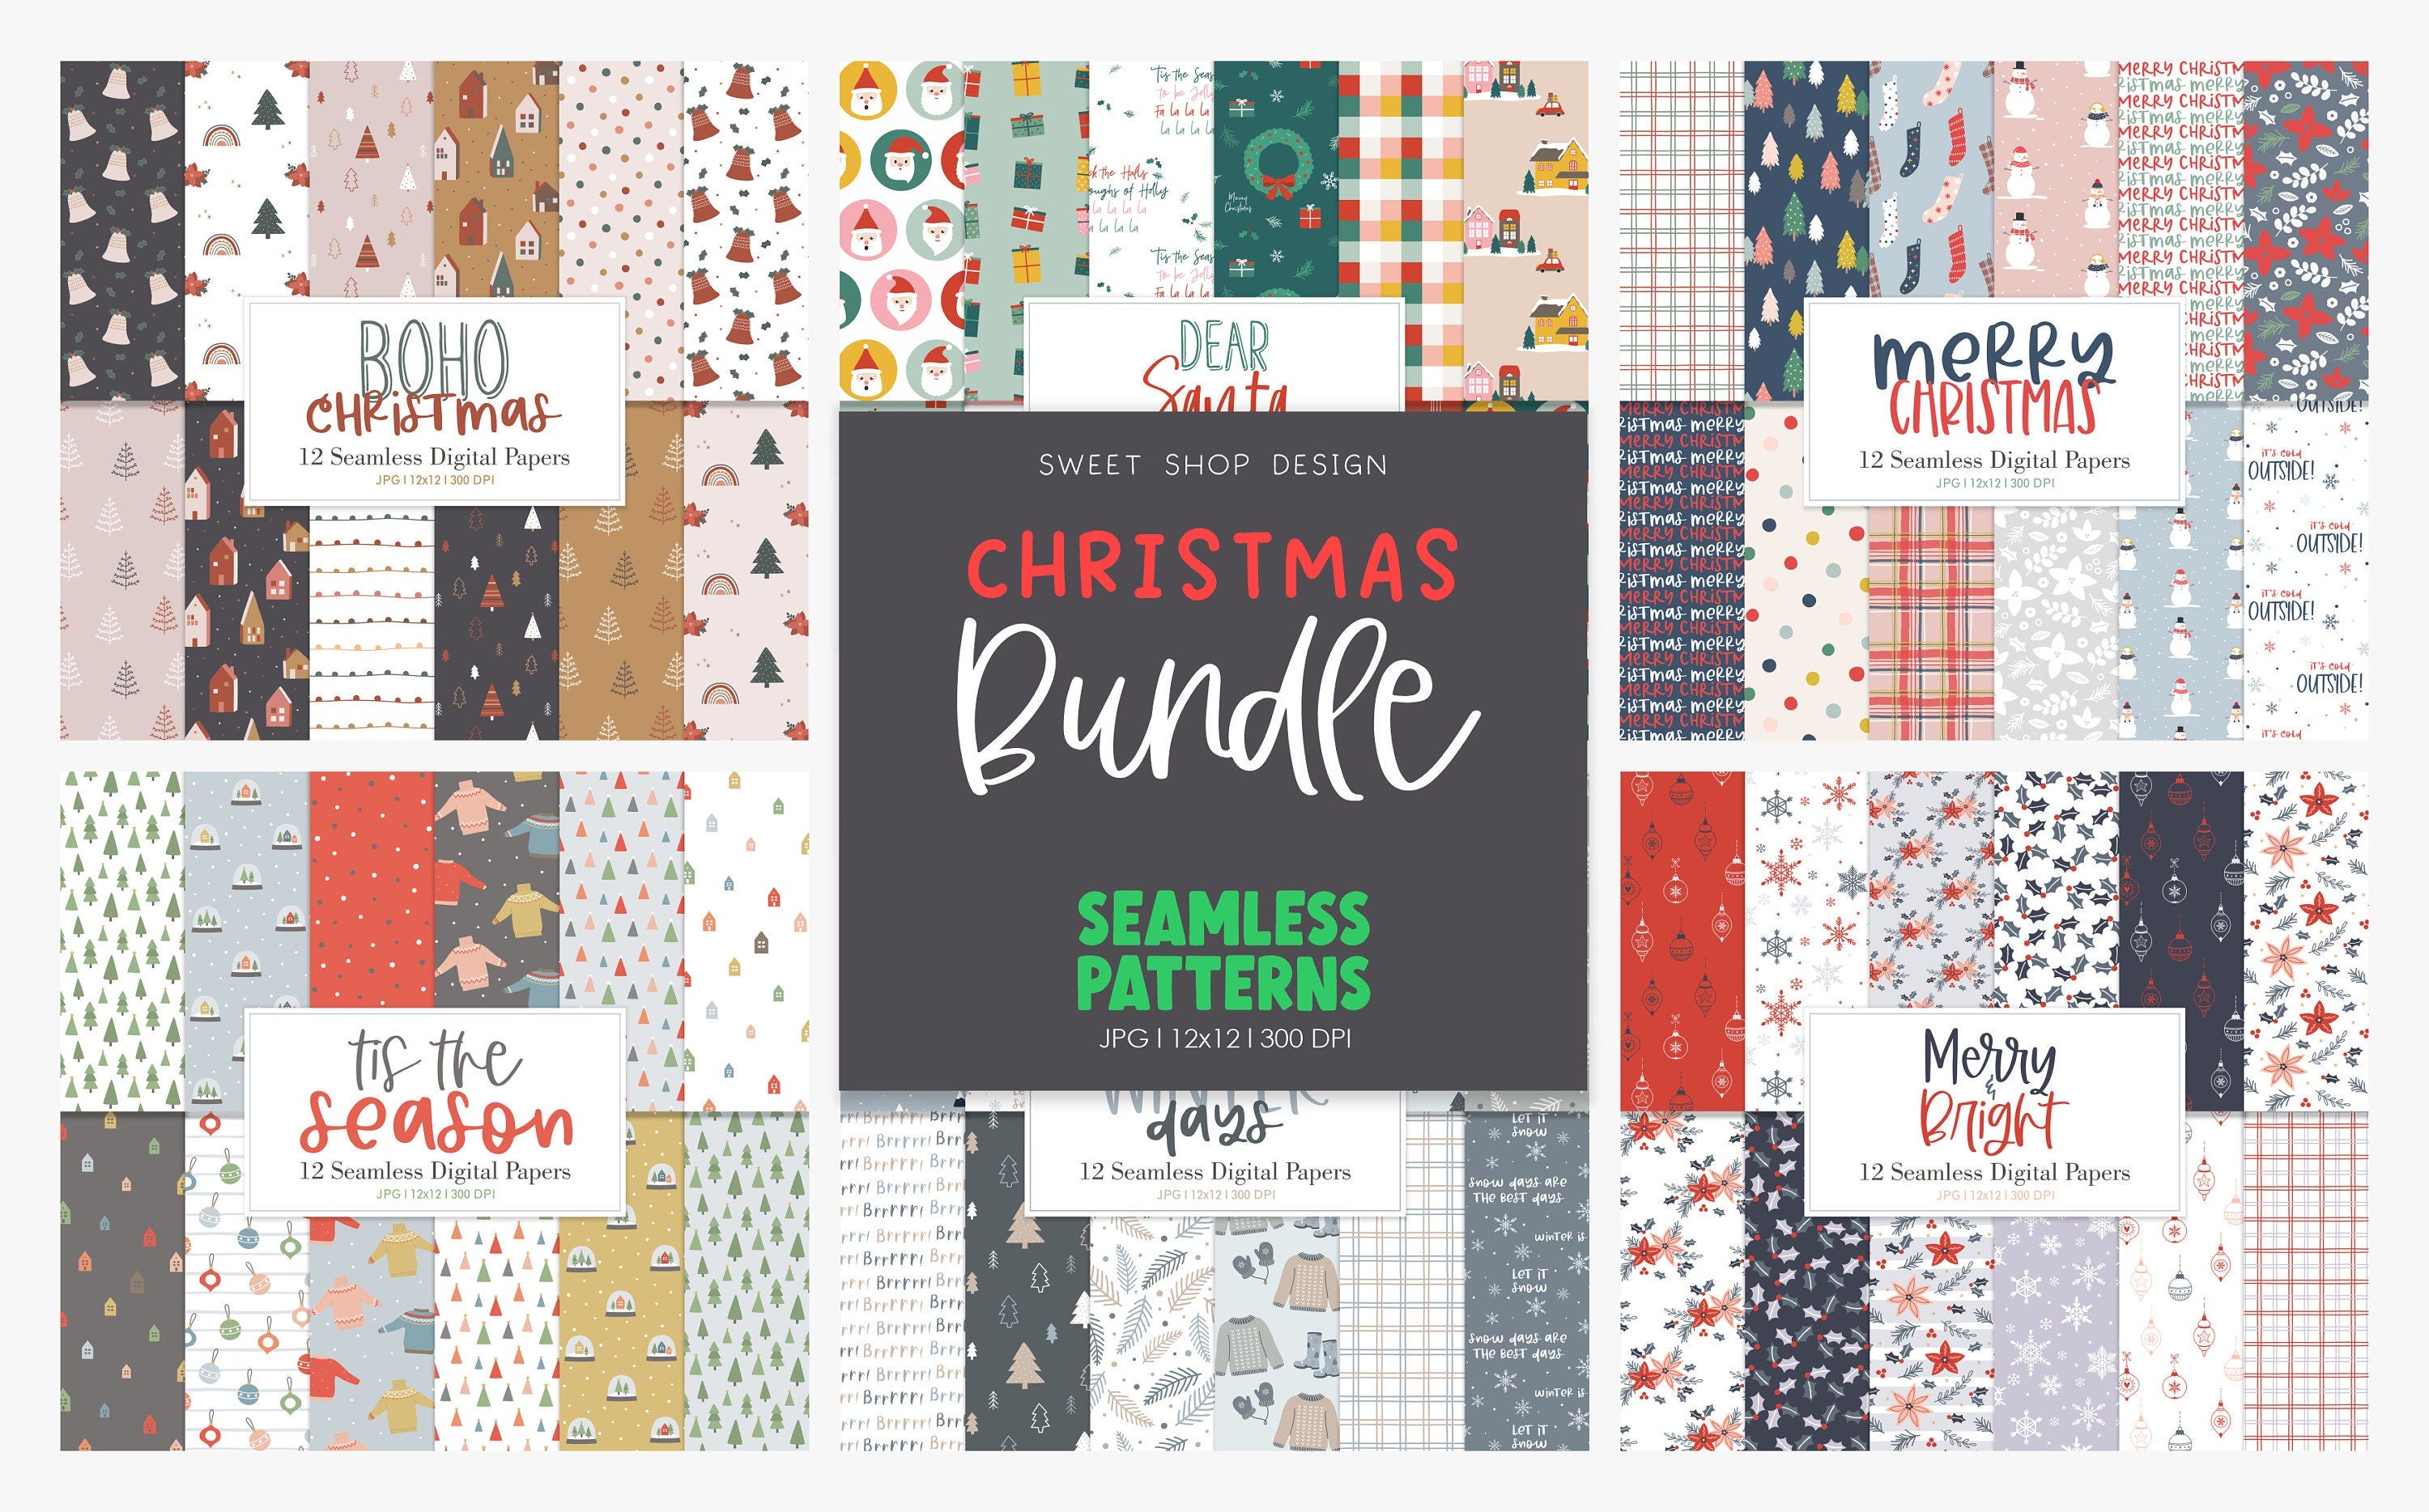 Seamless Patterns Bundle Vol 1, Christmas Patterns, Backgrounds, Printable Digital Papers